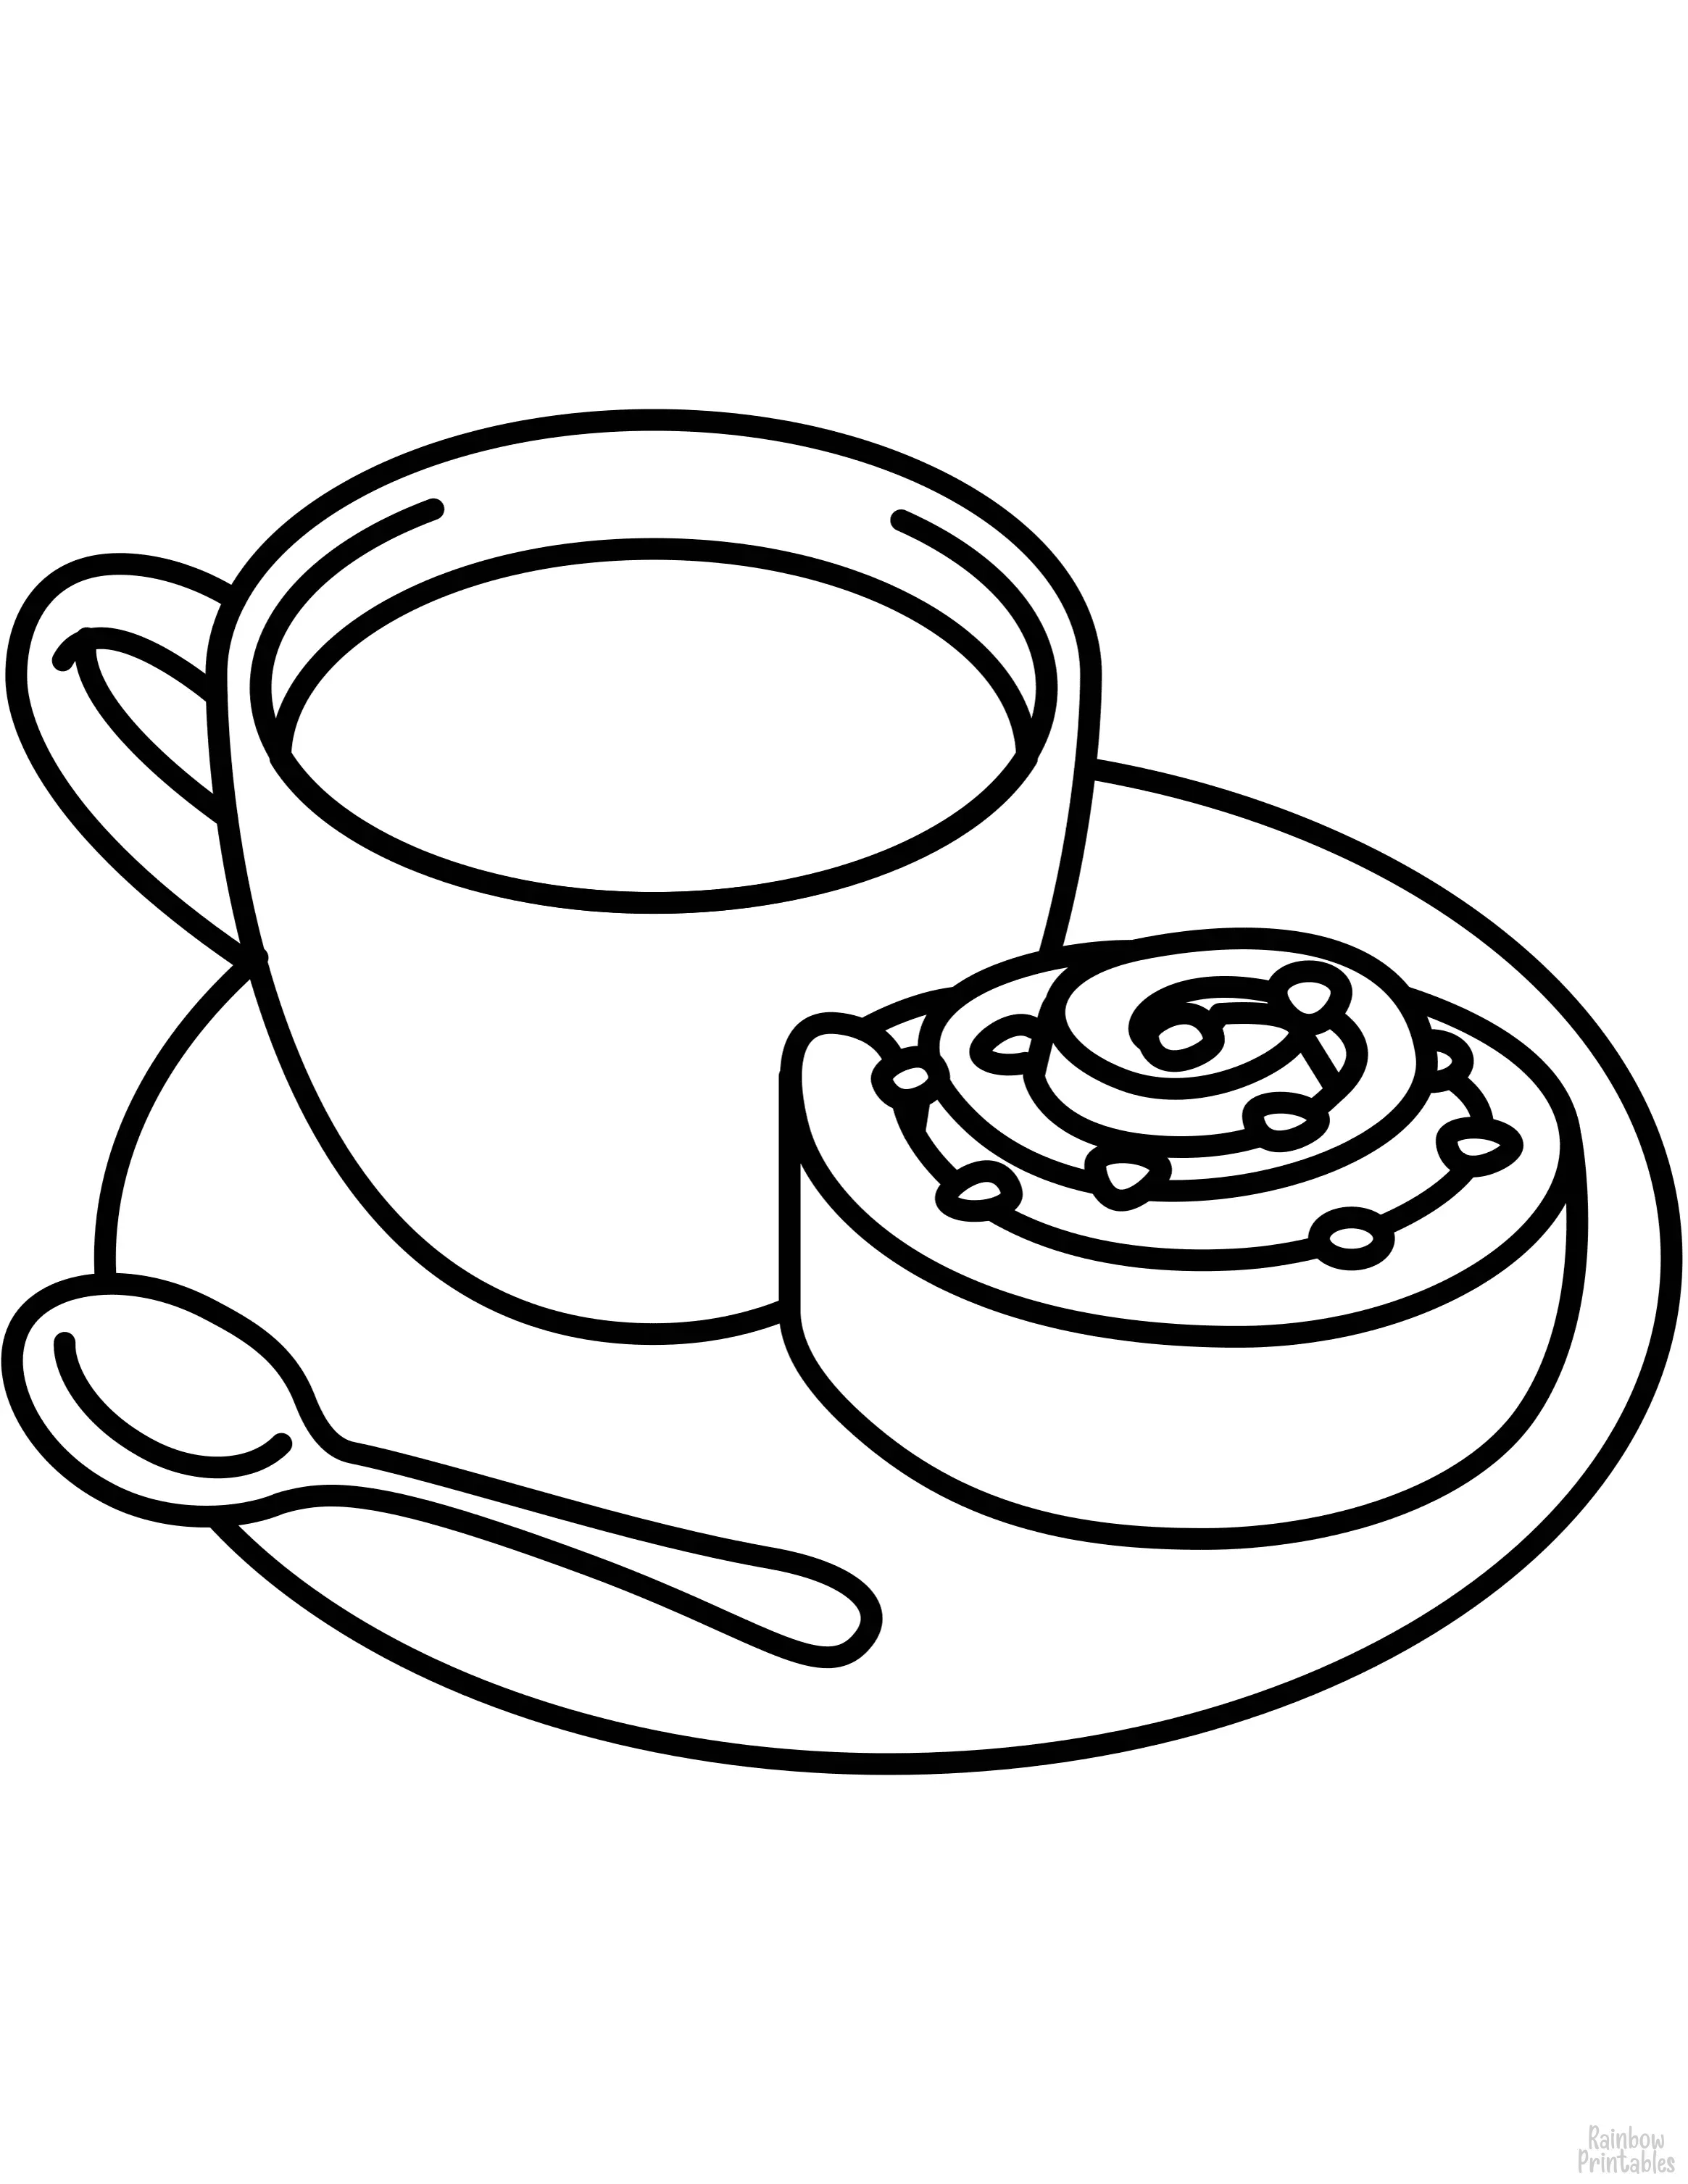 BReastfast FOOD COFFEE SWEDISH CINNAMON ROLL FIKA Clipart Coloring Pages Line Art Drawings for Kids-01